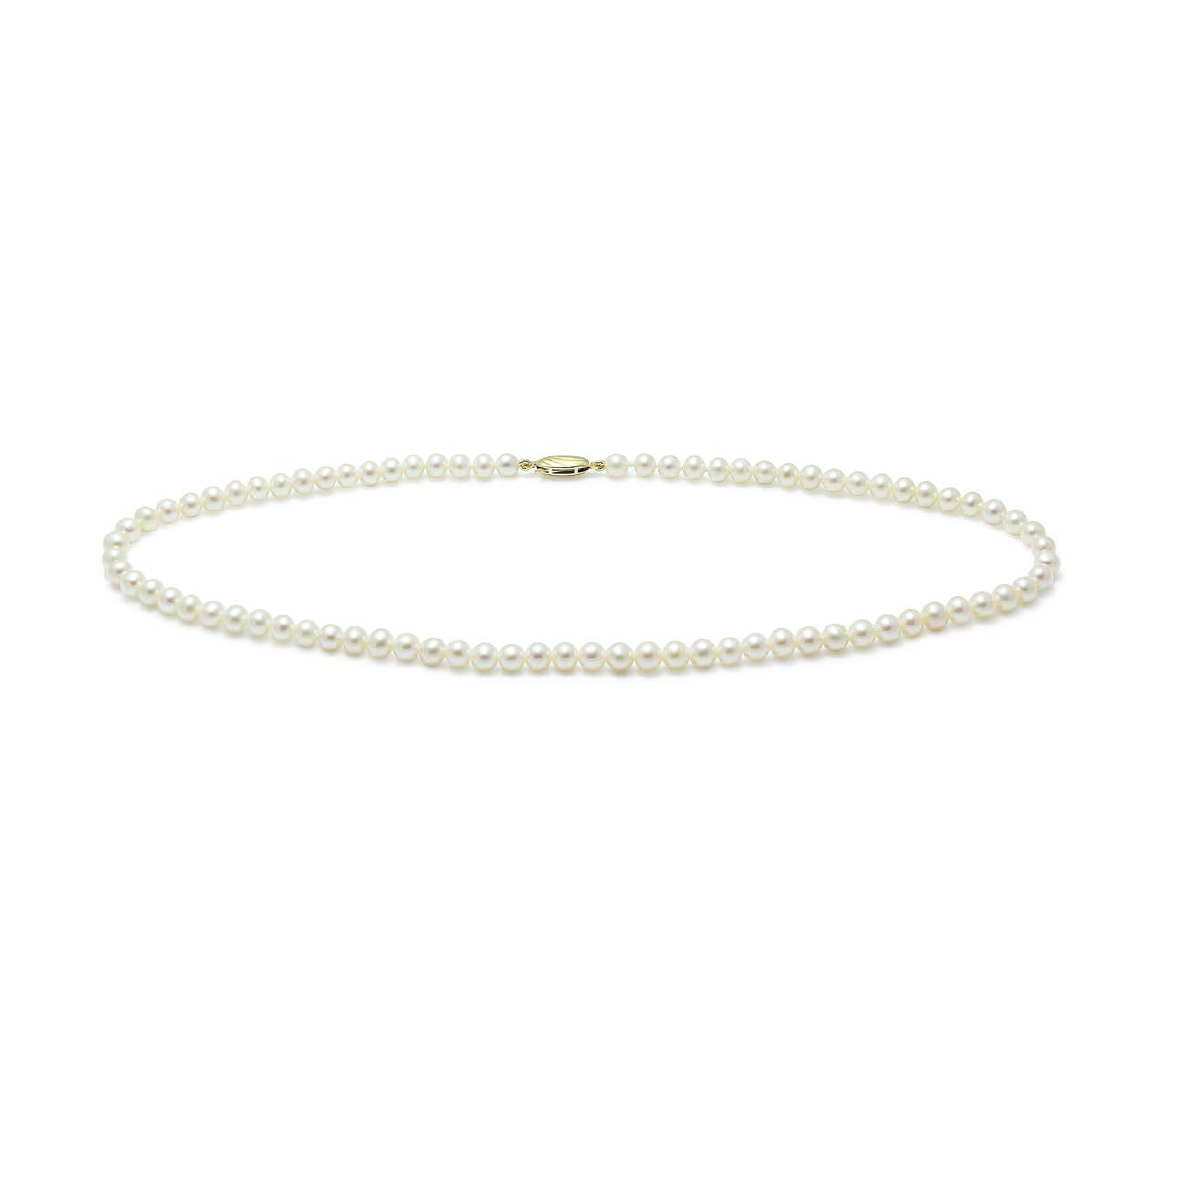 5mm Cultured River Pearl Necklace with Silver Clasp